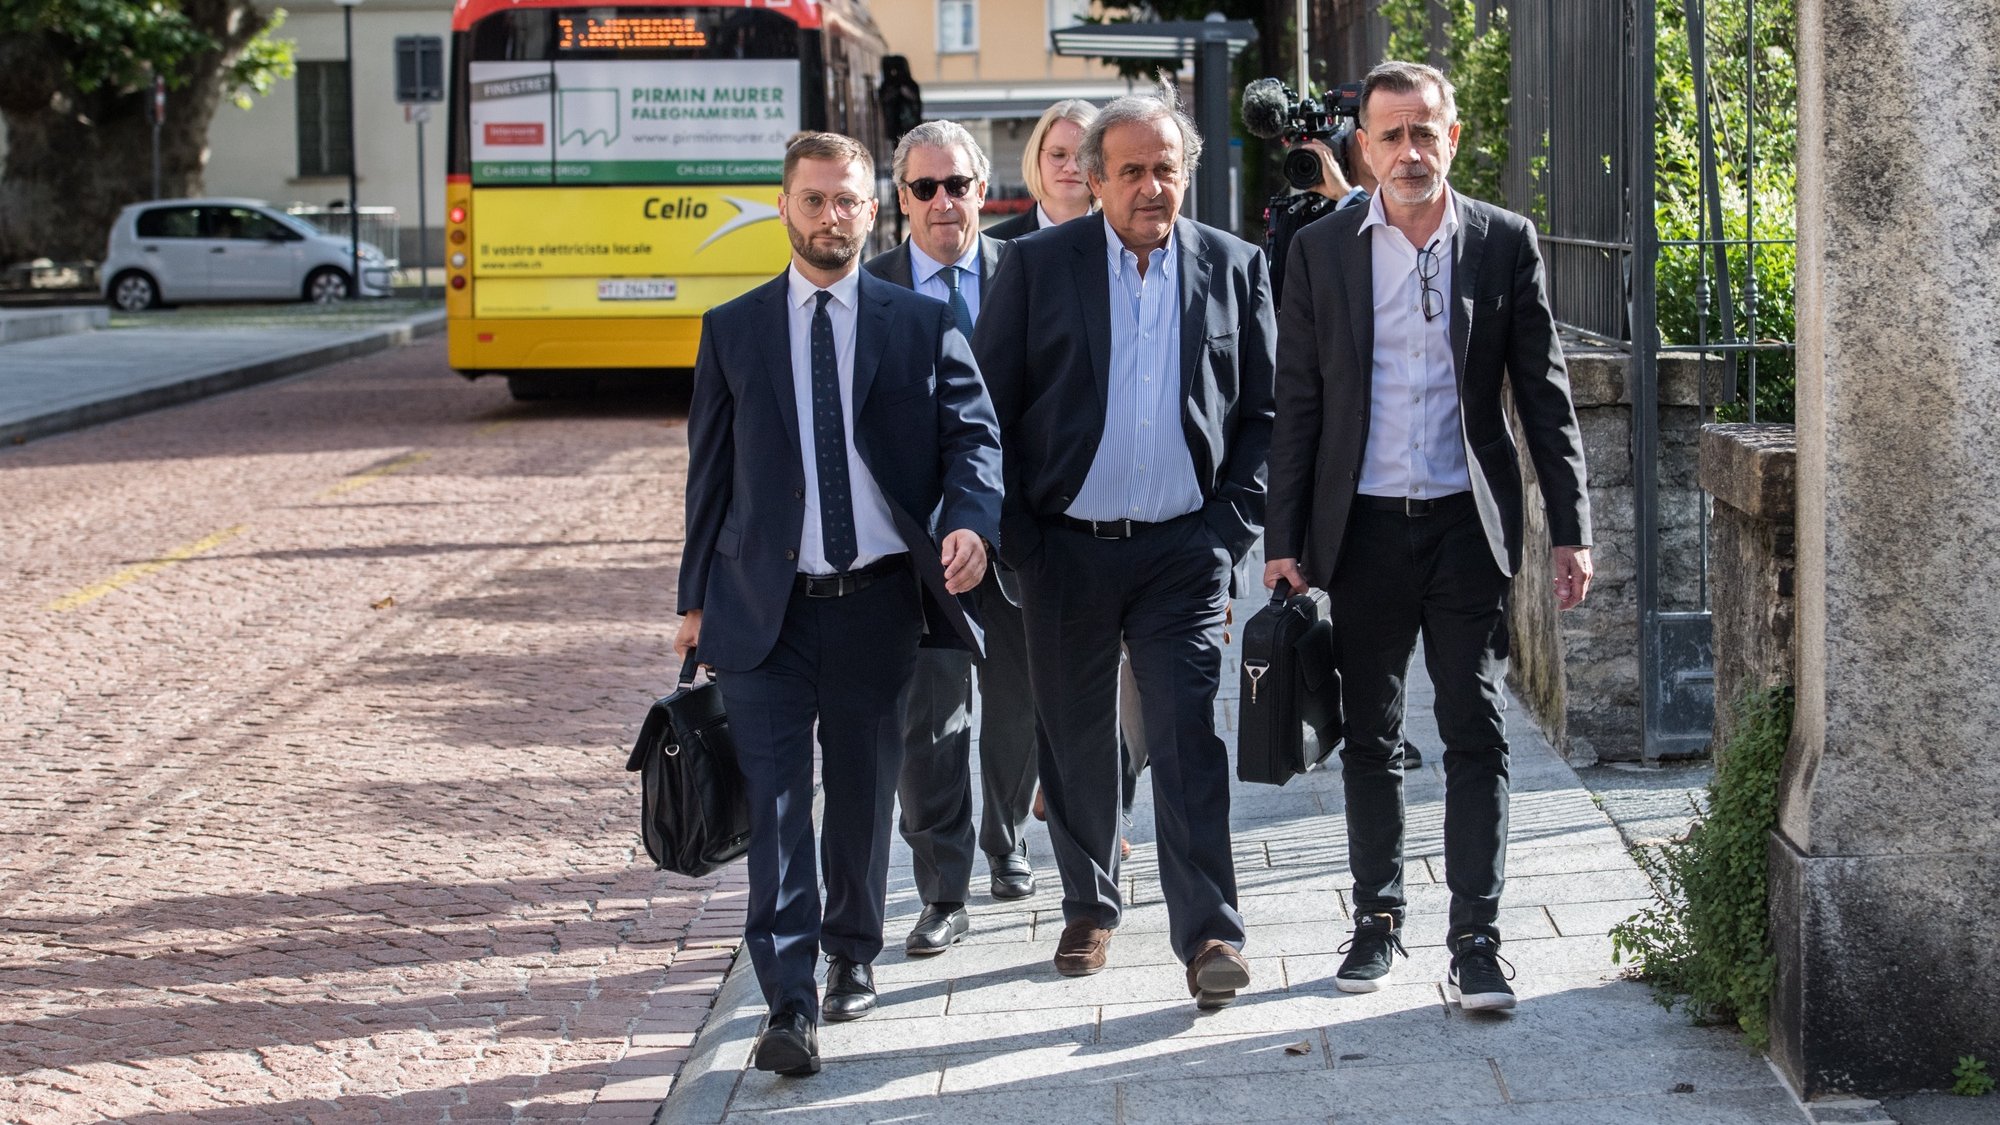 epa10001424 The former president of the the European Football Association (Uefa), Michel Platini (C), and his lawyers arrive to the process at the Swiss Federal Criminal Court in Bellinzona, Switzerland, 08 June 2022. Platini and the former president of the World Football Association (Fifa), Joseph Blatter, will stand trial before the Federal Criminal Court from 08 June, over a suspicious two-million payment. The Federal Prosecutor&#039;s Office accuses them of fraud. The defense speaks of a conspiracy.  EPA/ALESSANDRO CRINARI